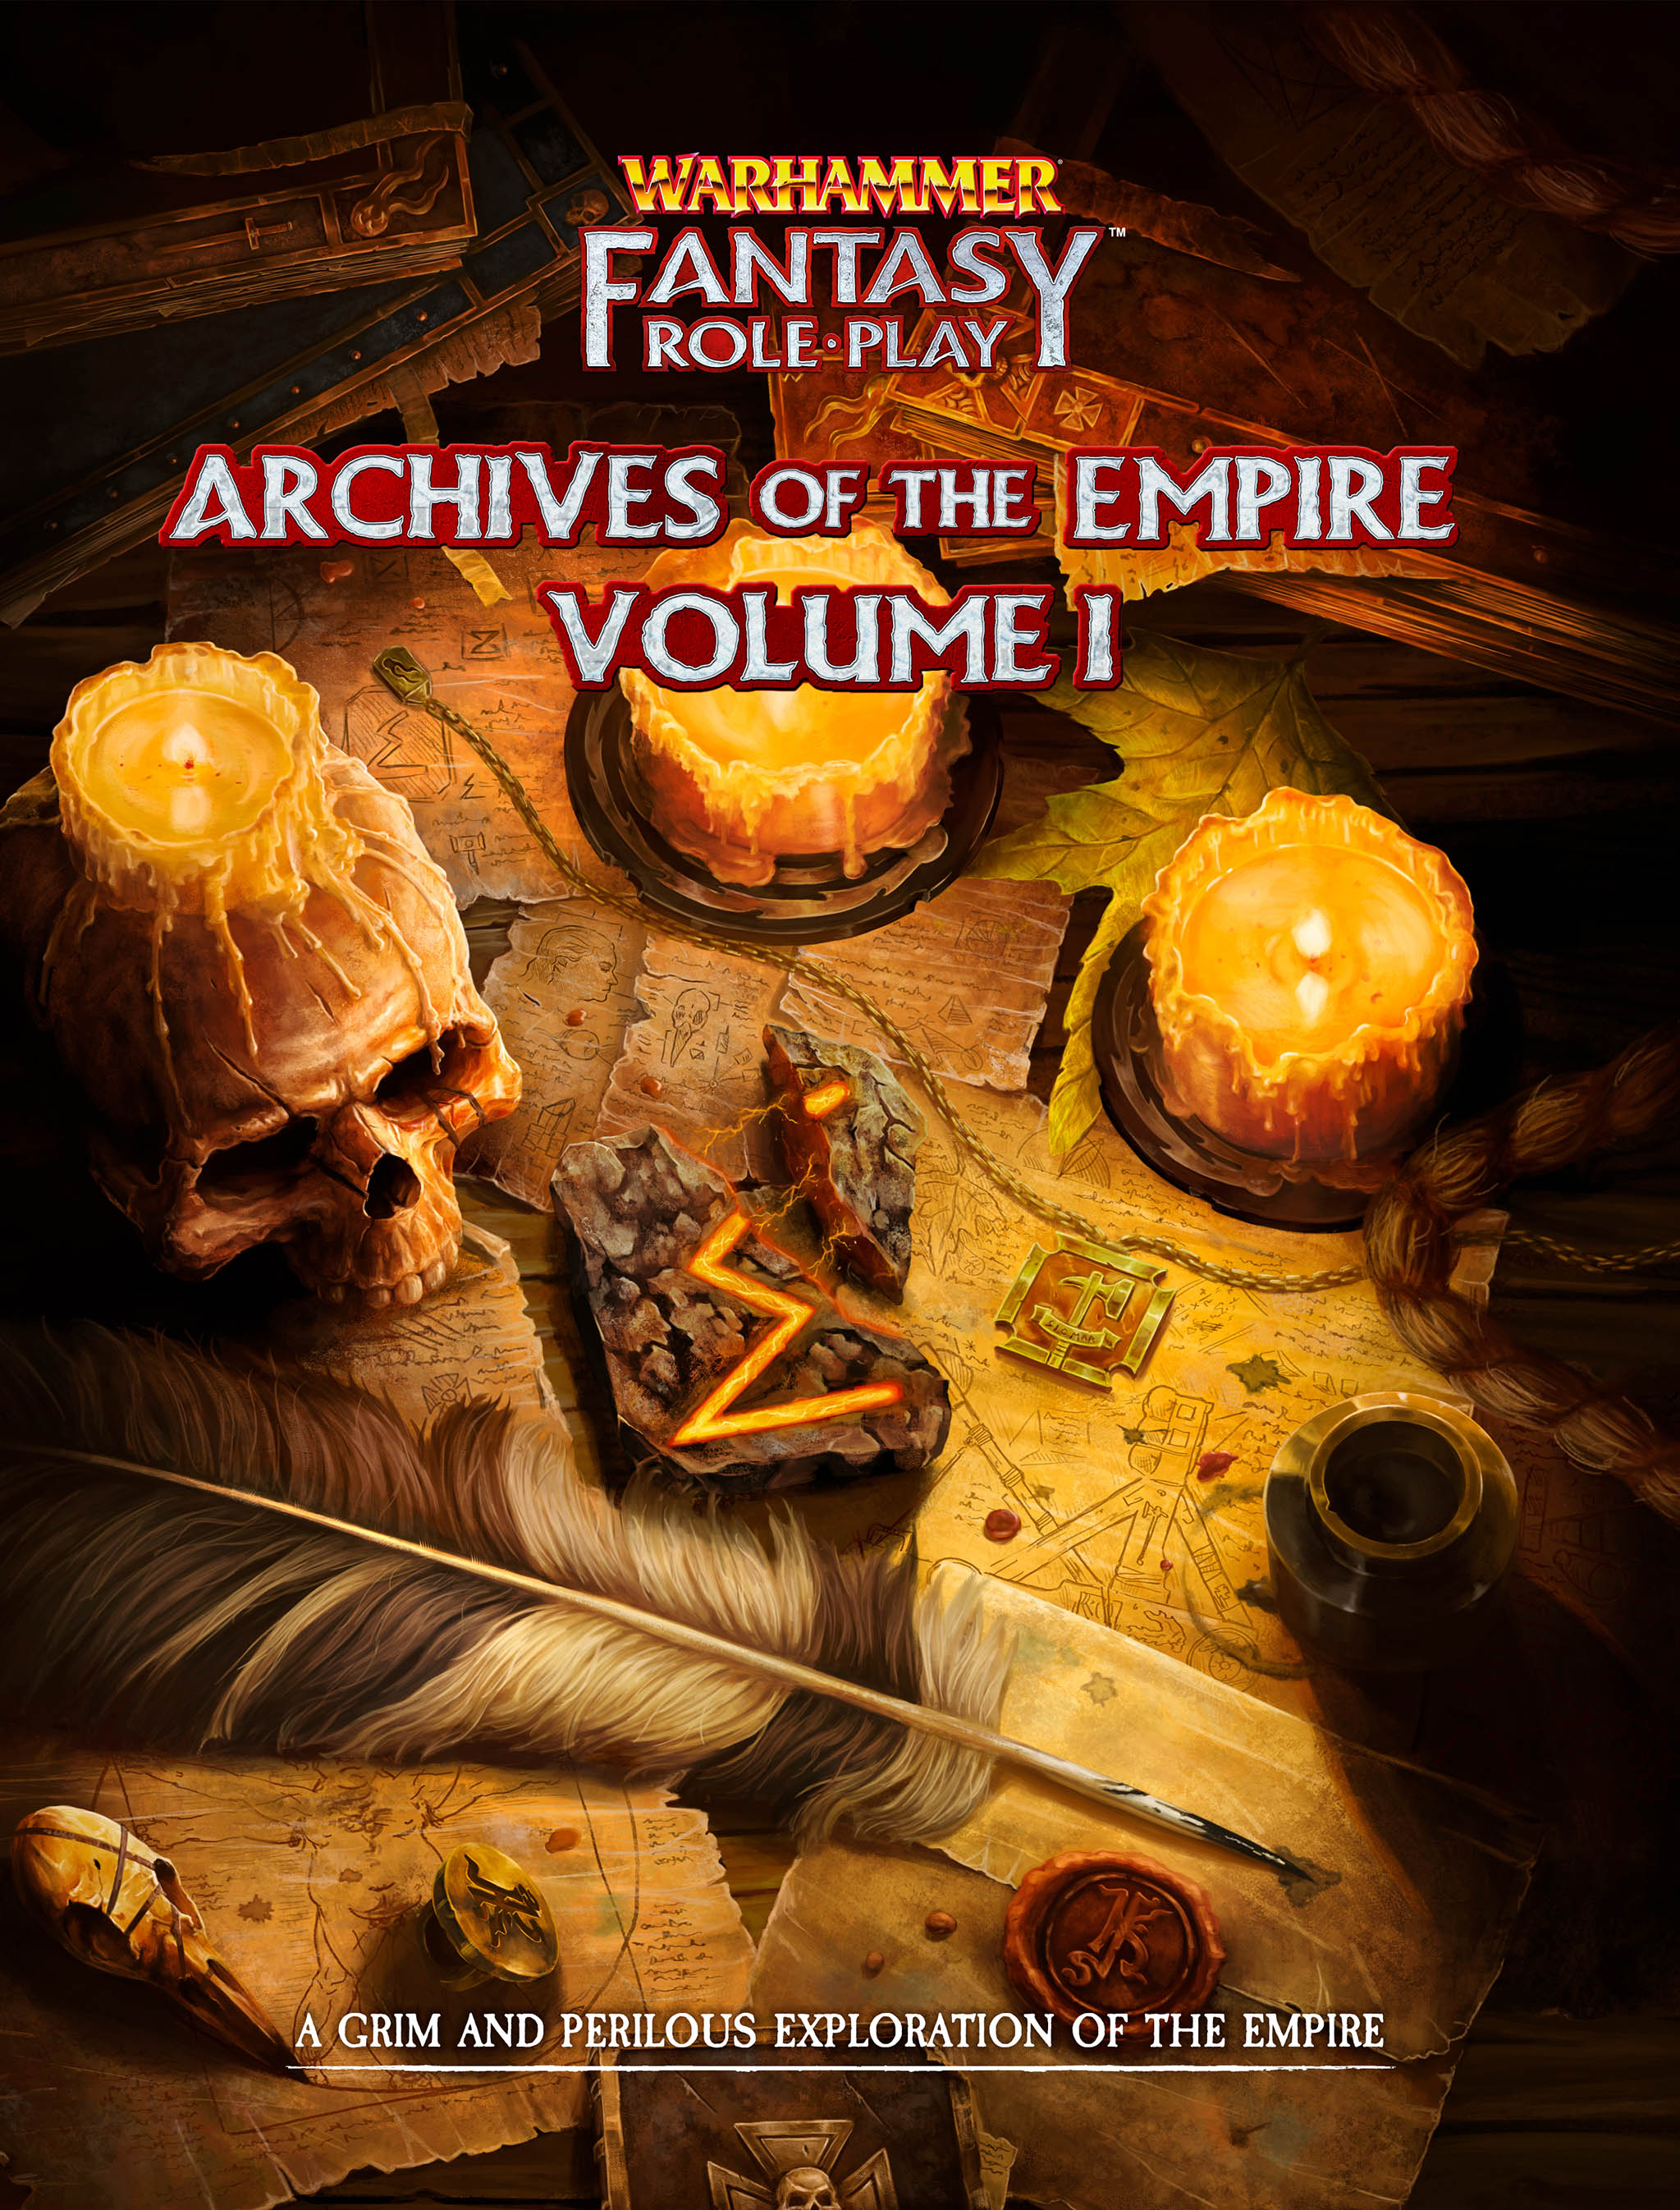 Warhammer Fantasy Roleplay (4th Ed): Archives of the Empire Volume 1 [Damaged] 